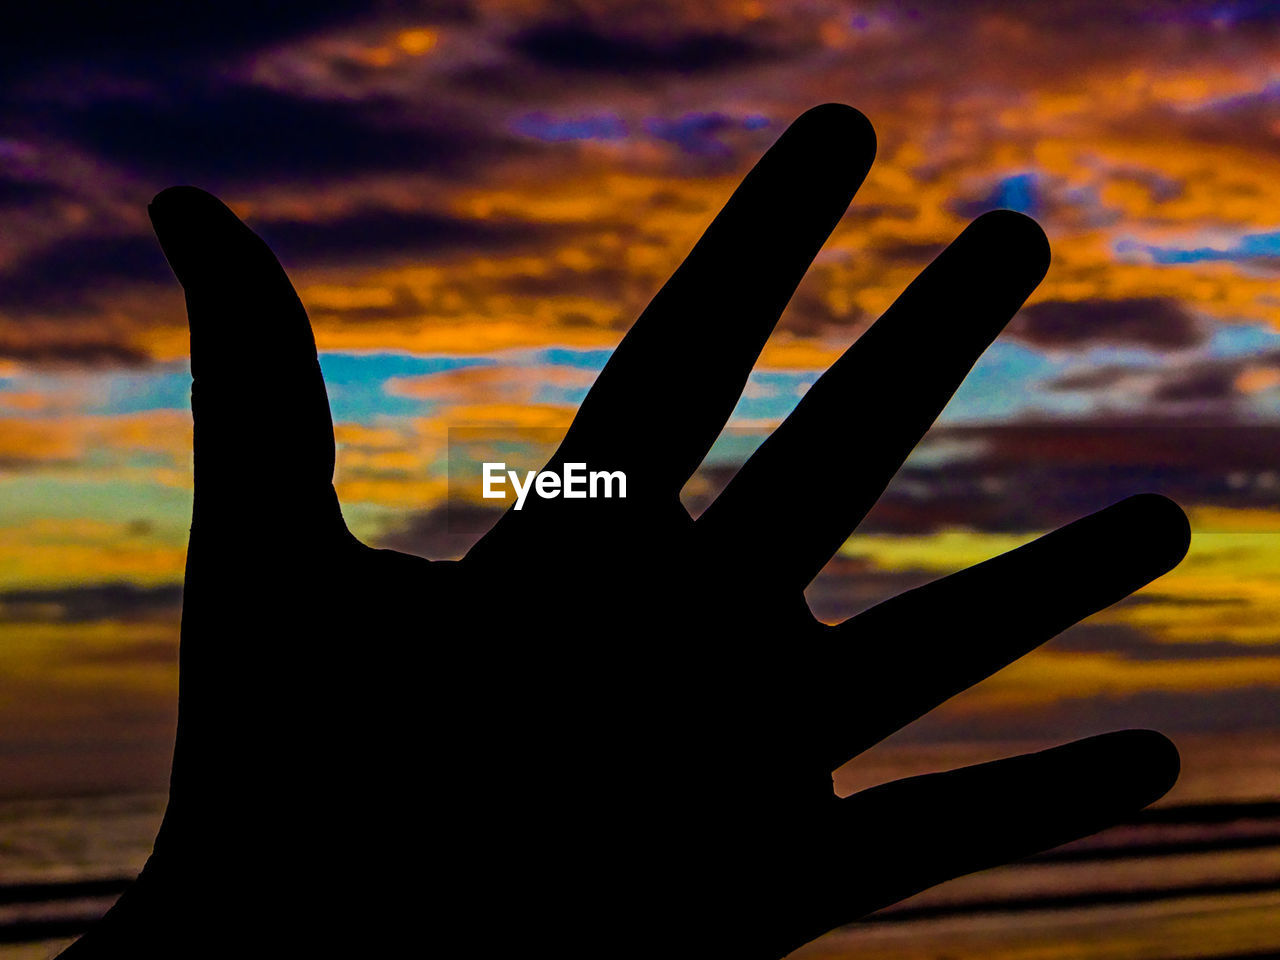 CLOSE-UP OF SILHOUETTE HAND AGAINST SKY